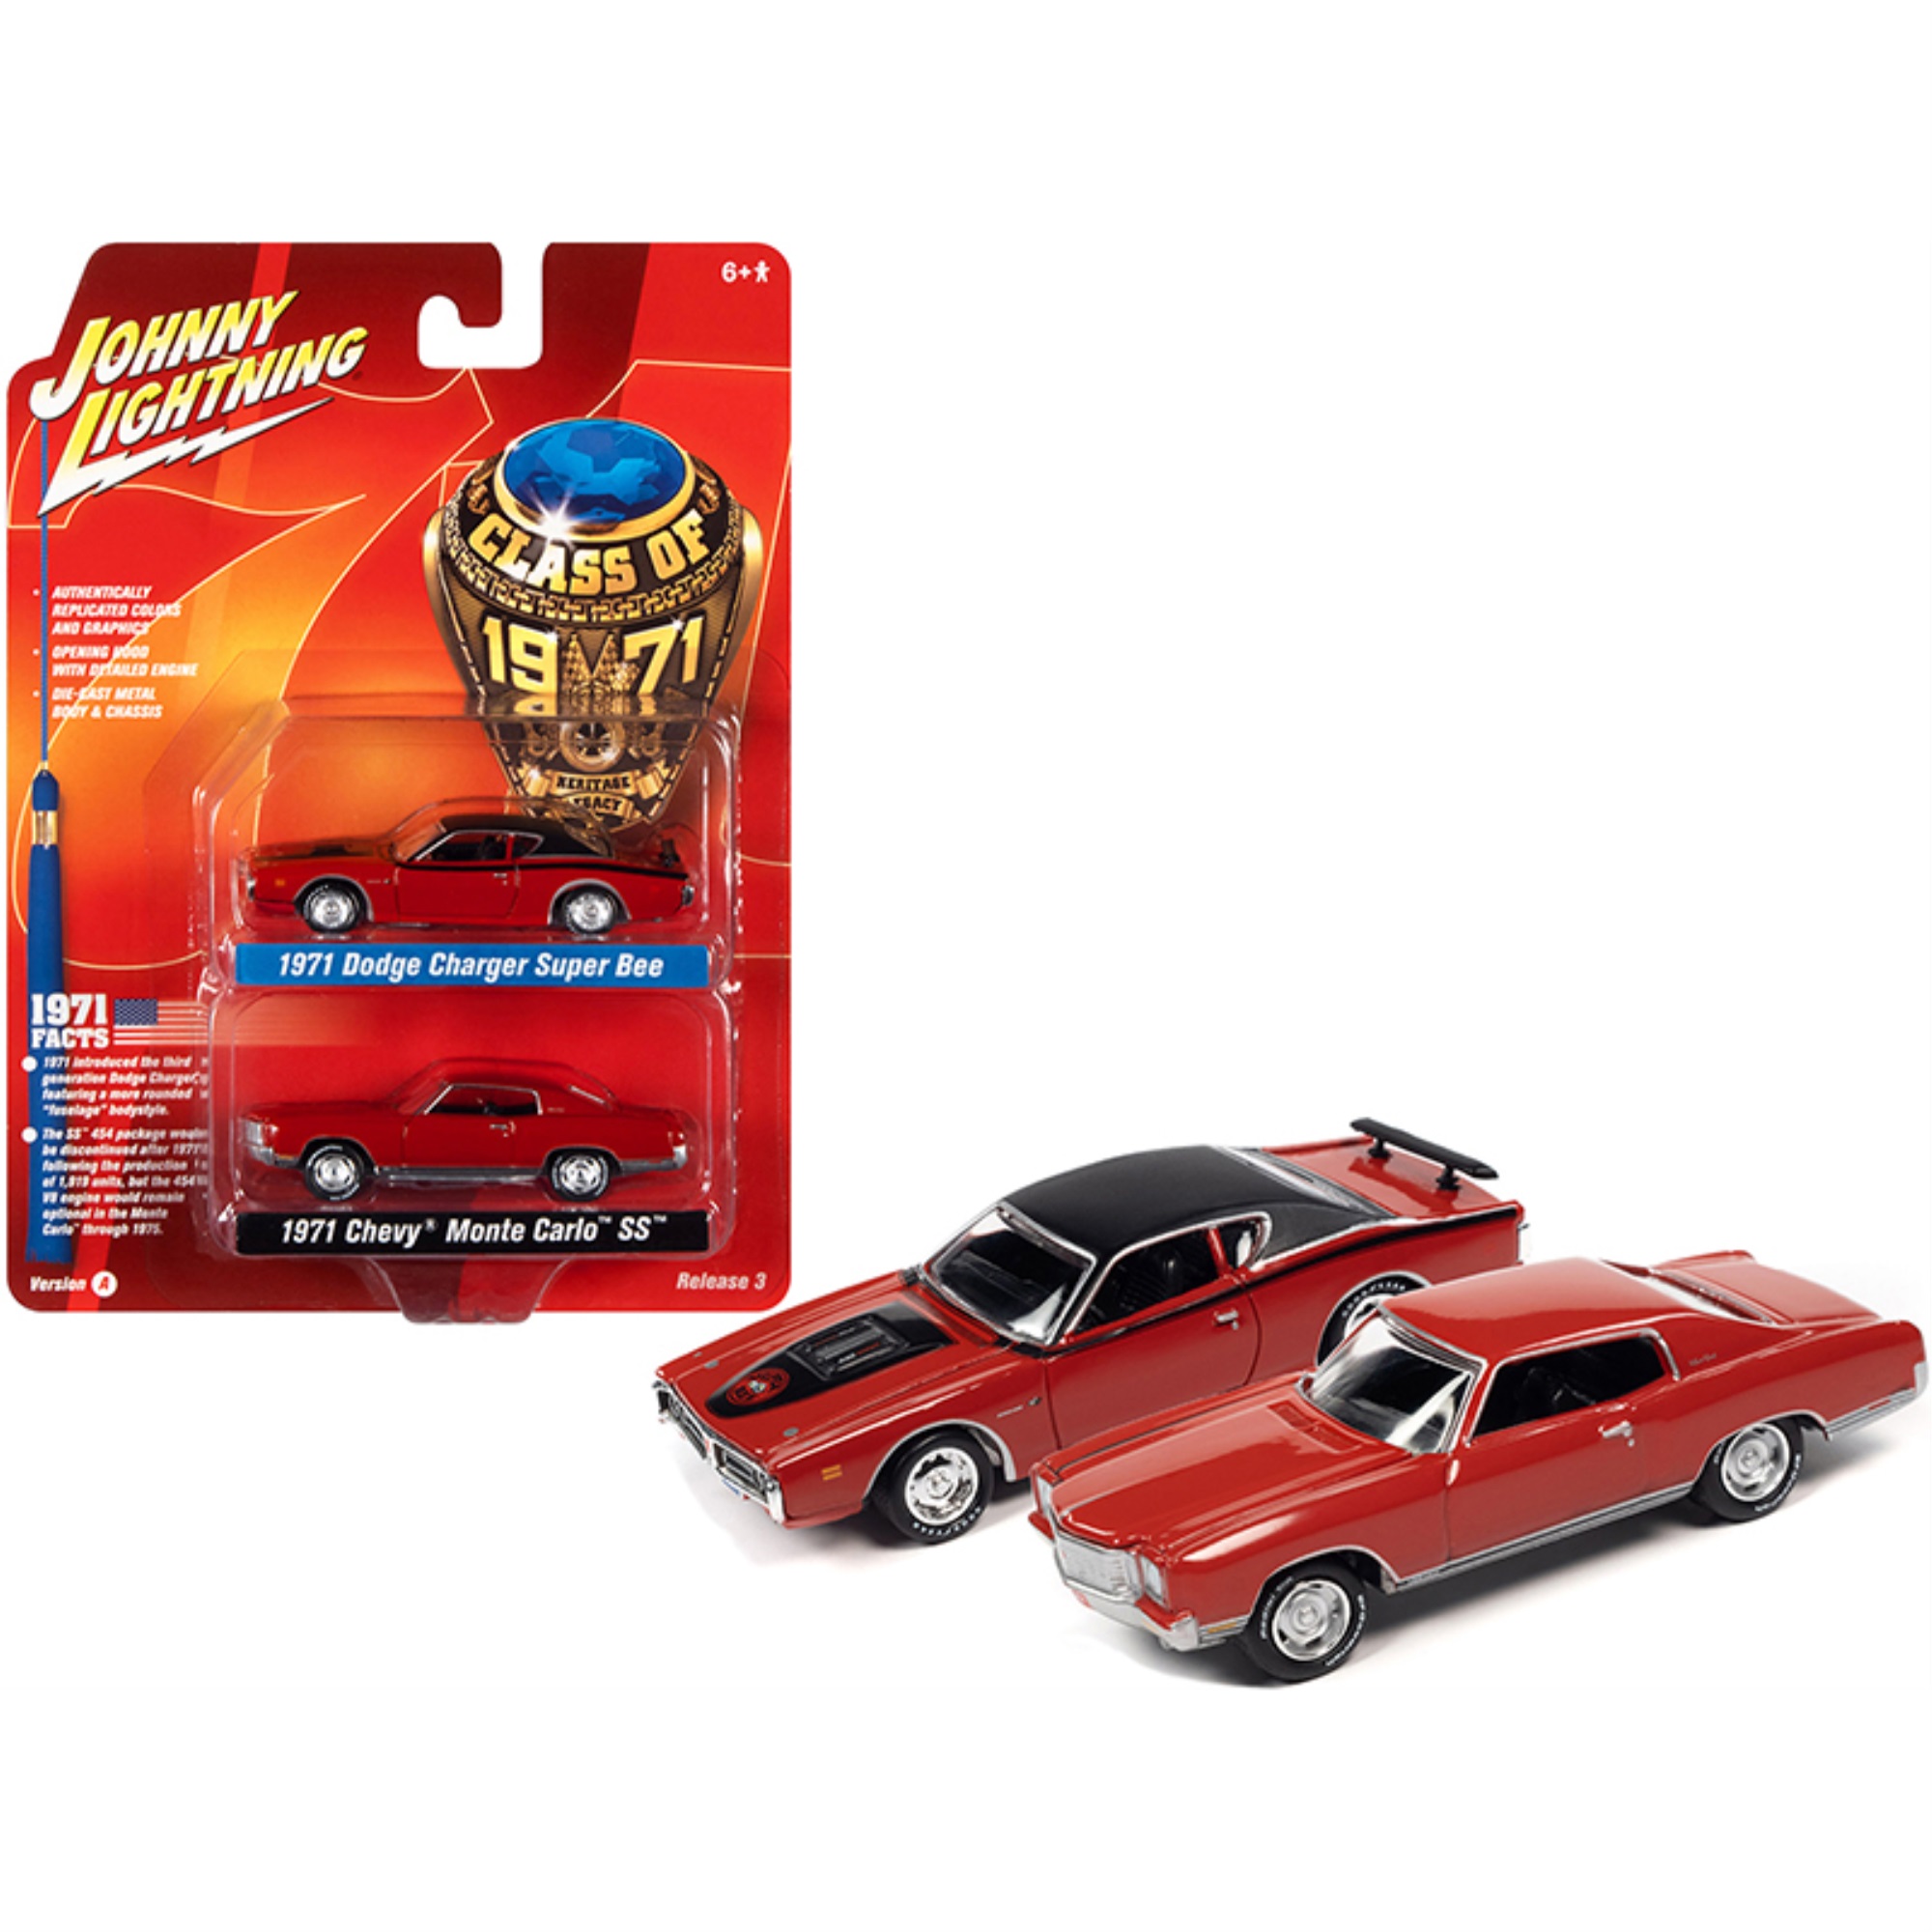 JohnnyLightning 1971 Dodge Charger Super Bee Red with Black Top and 1971 Chevrolet Monte Carlo SS Cranberry Red "Class of 1971" Set of 2 Cars 1